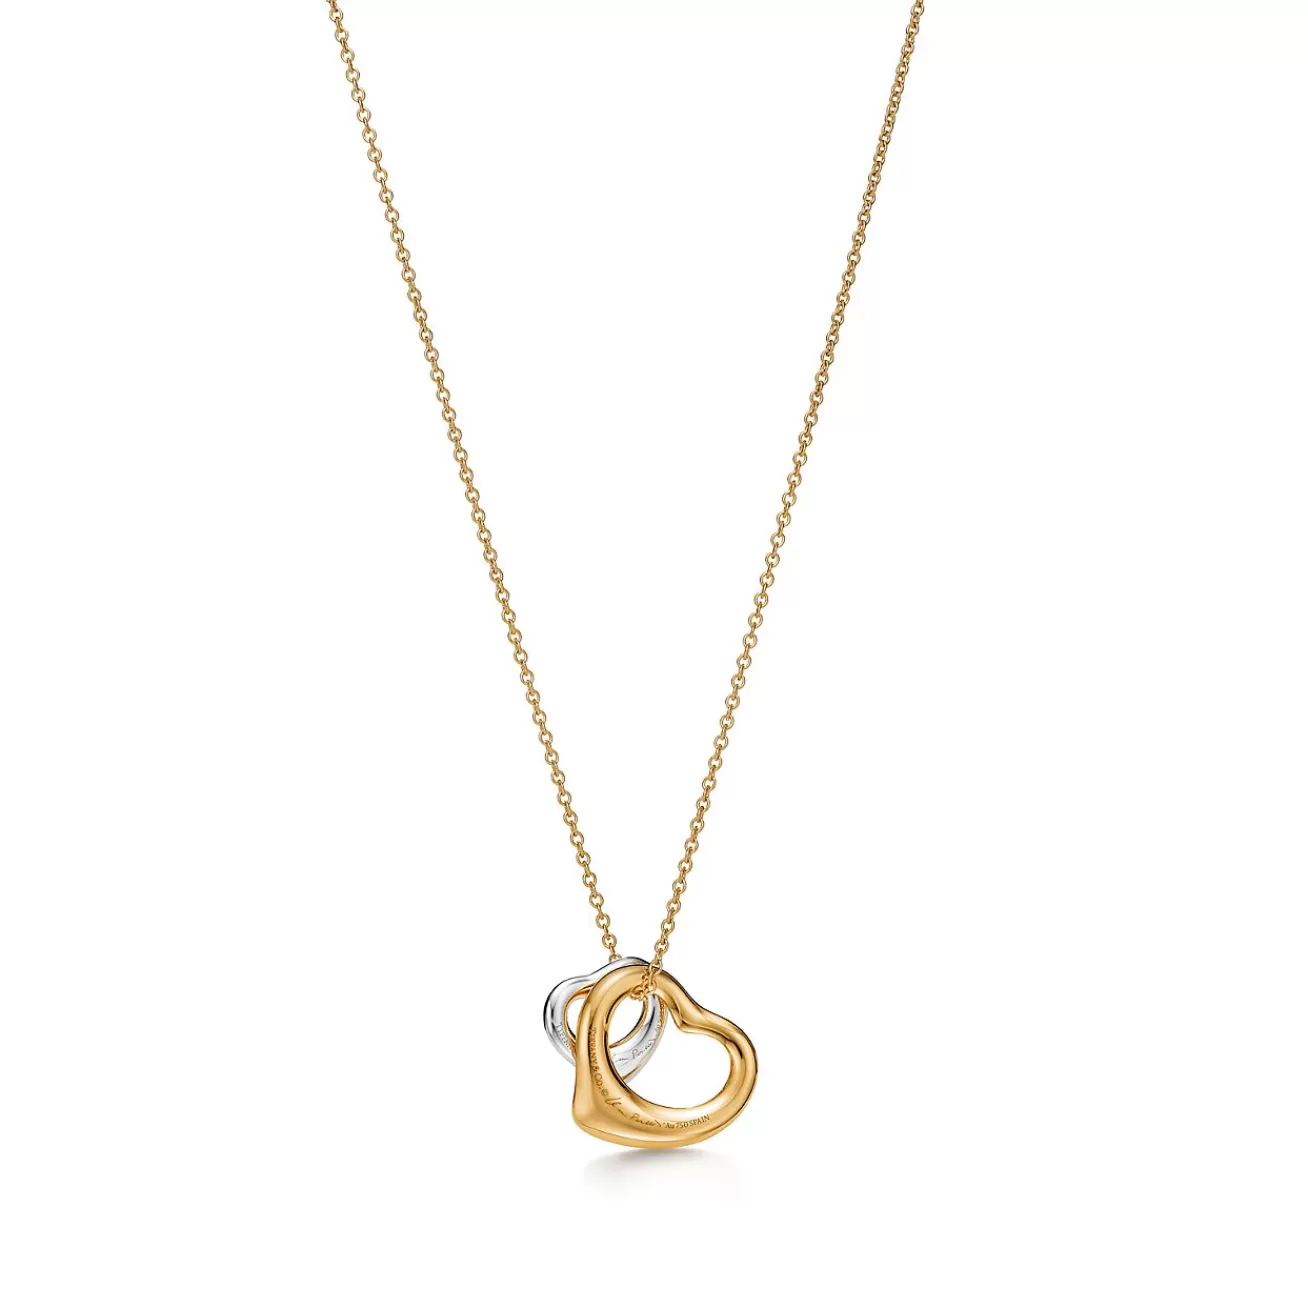 Tiffany & Co. Elsa Peretti® Open Heart Pendant in Yellow Gold and Sterling Silver | ^ Necklaces & Pendants | Gifts for Her